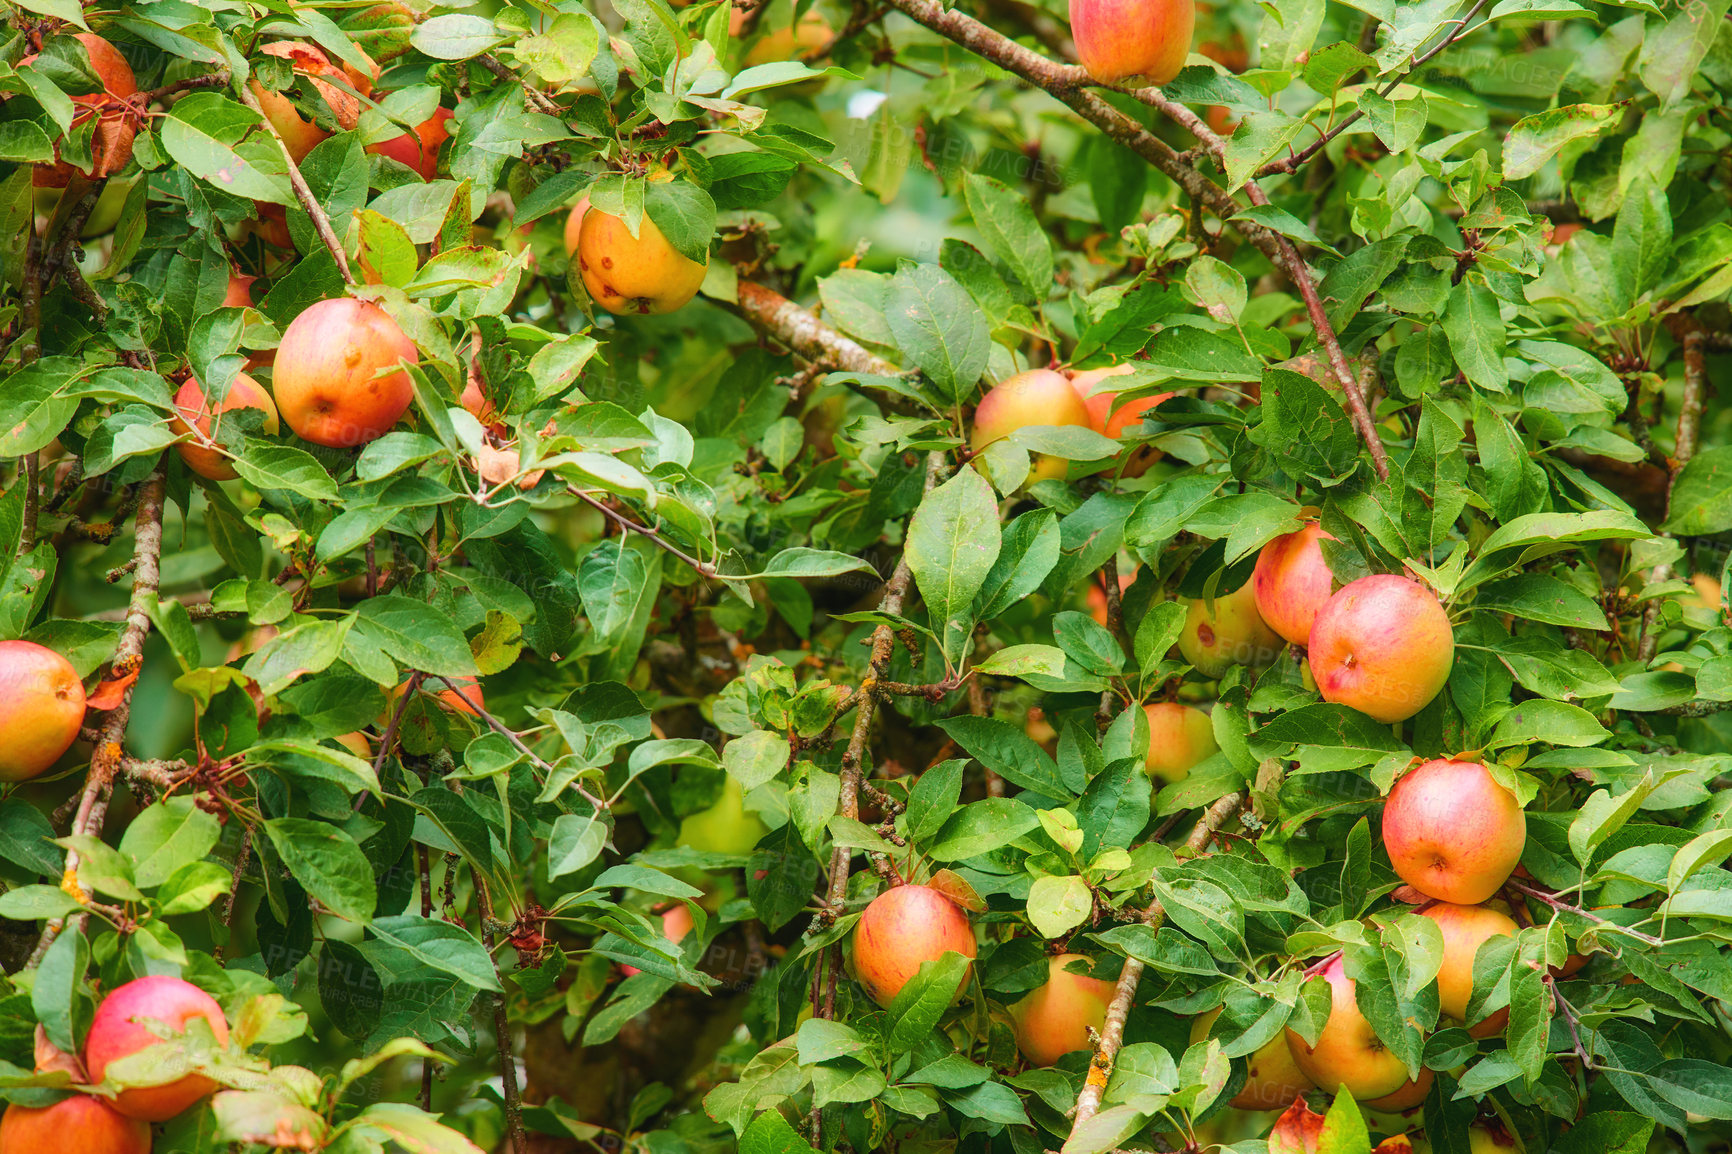 Buy stock photo Group of red apples on an orchard tree with green leaves. Organic fruit growing on a cultivated or sustainable farm. Delicious, healthy, and nutritious produce flourishing during harvesting season